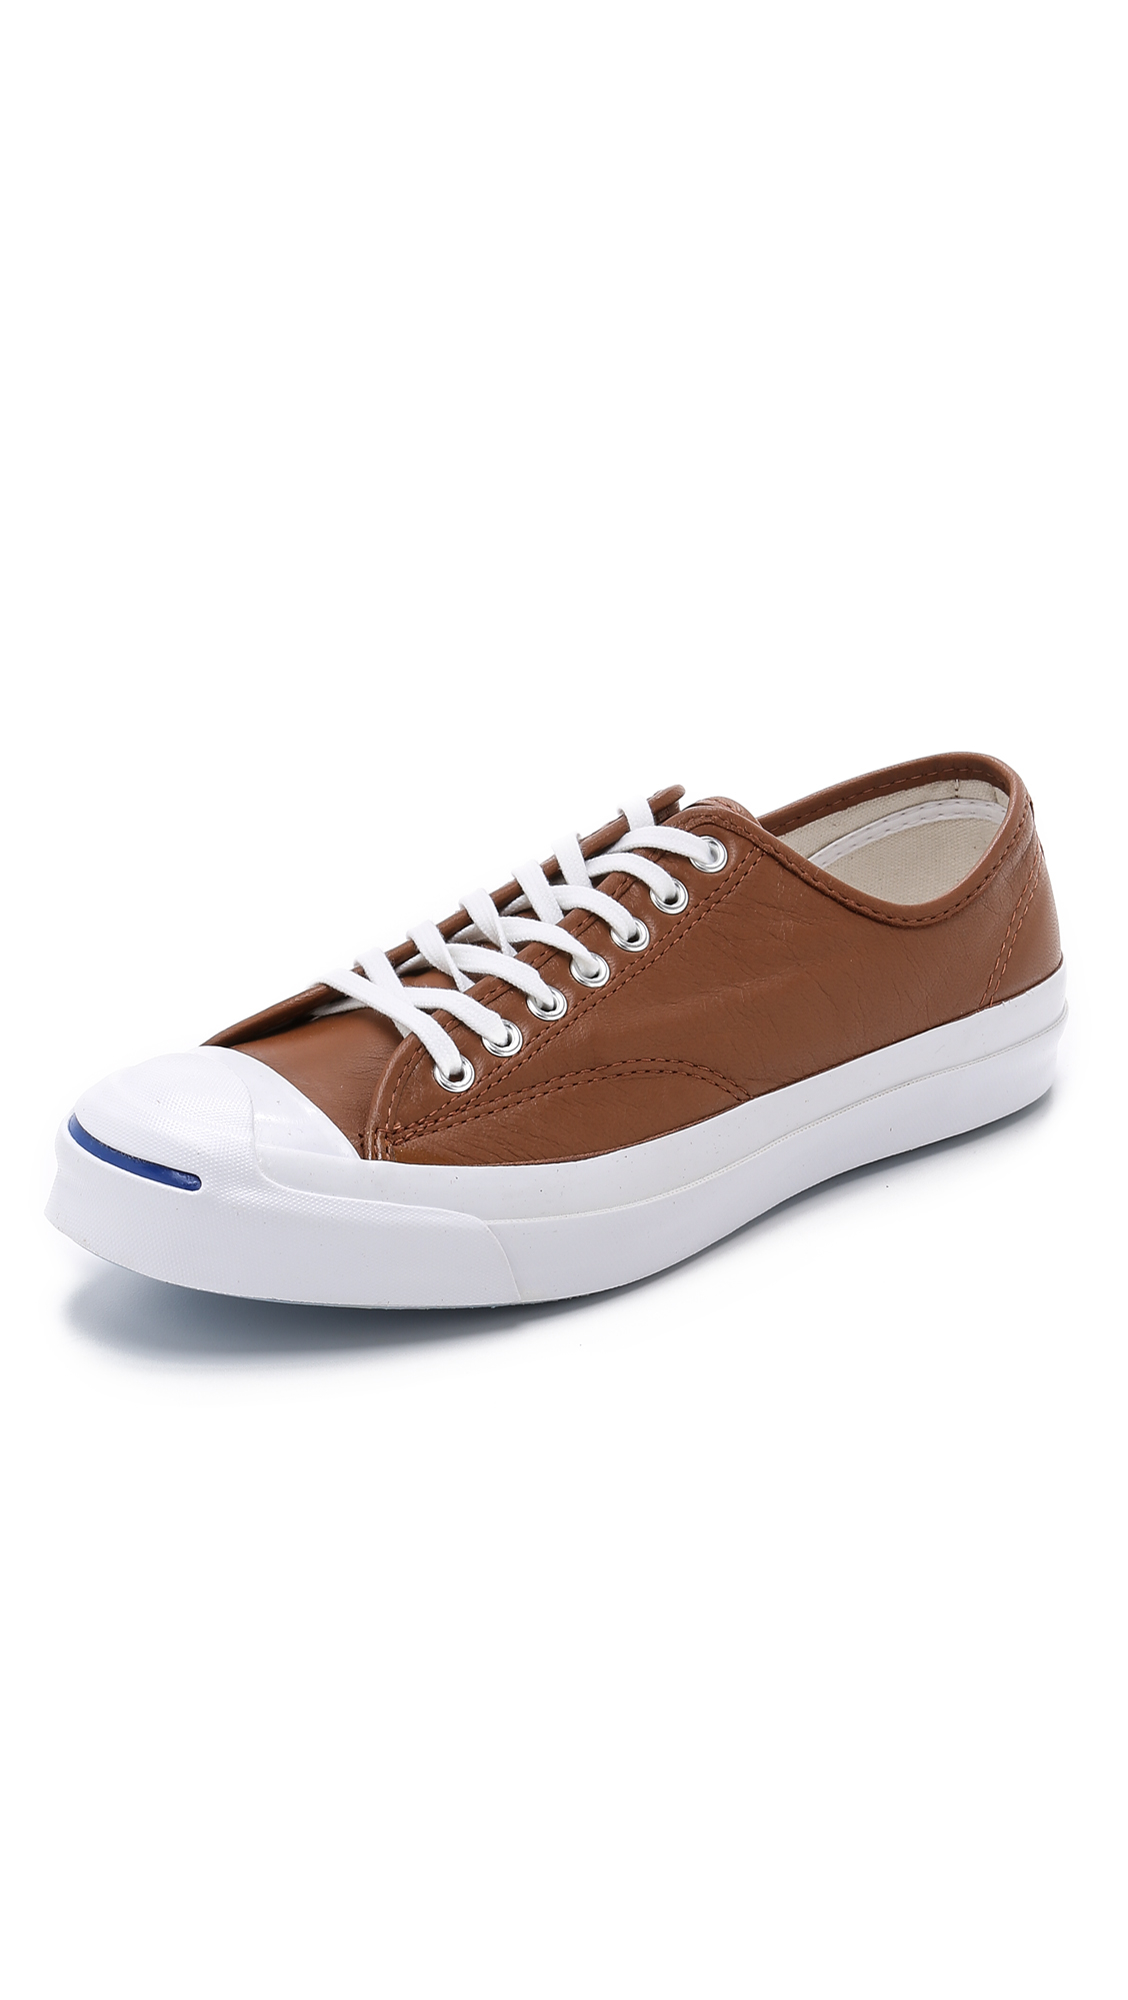 Lyst - Converse Jack Purcell Signature Leather Sneakers in Brown for Men